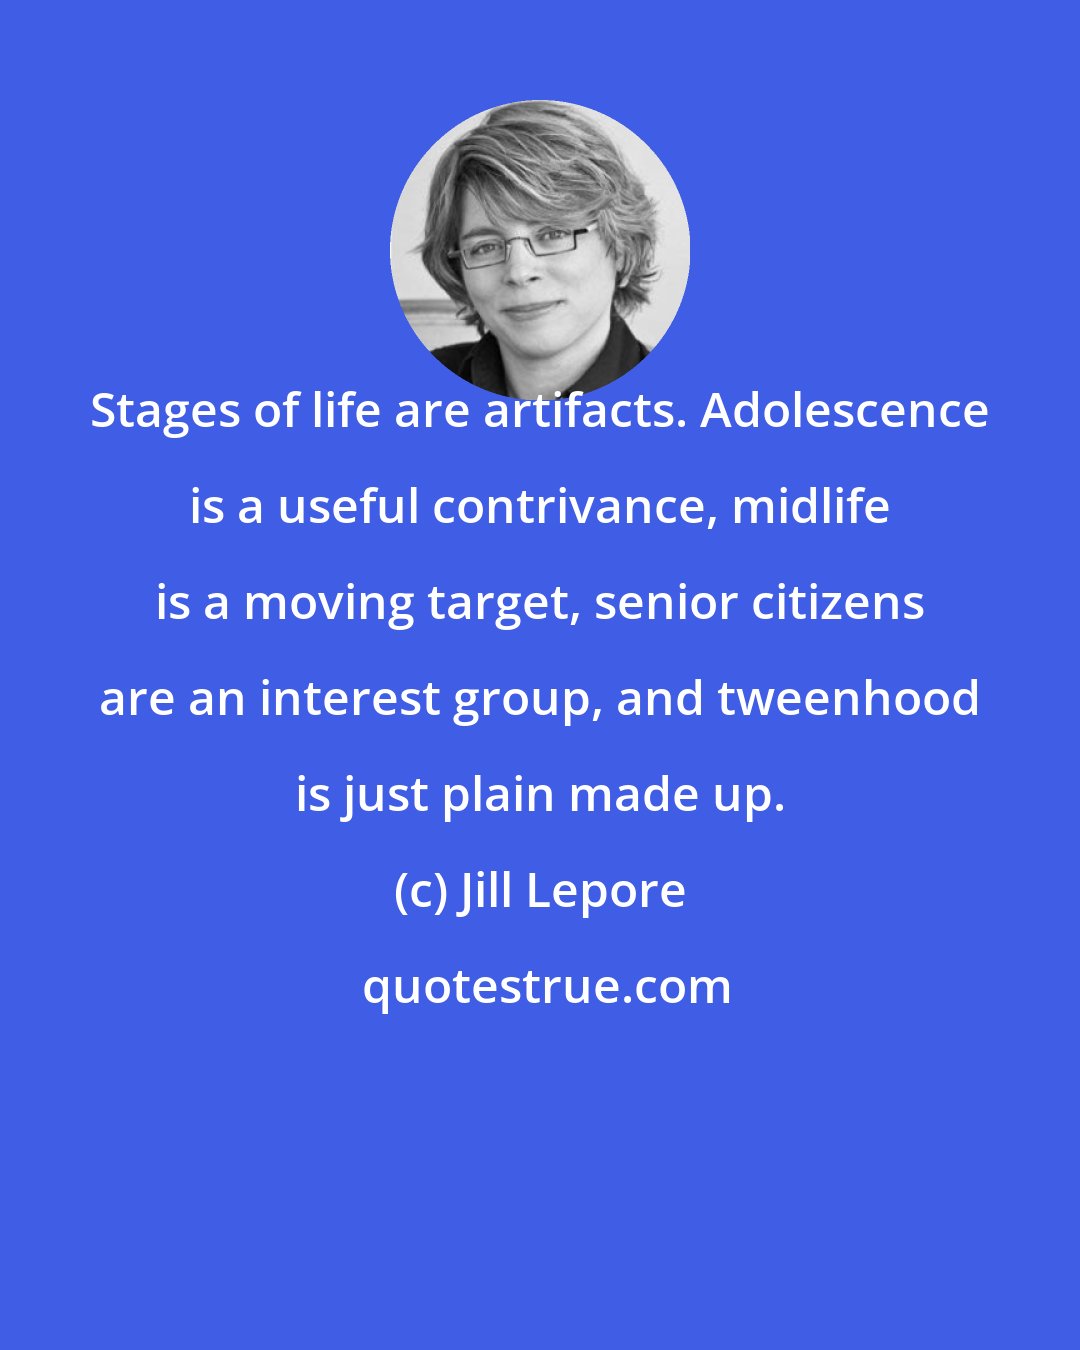 Jill Lepore: Stages of life are artifacts. Adolescence is a useful contrivance, midlife is a moving target, senior citizens are an interest group, and tweenhood is just plain made up.